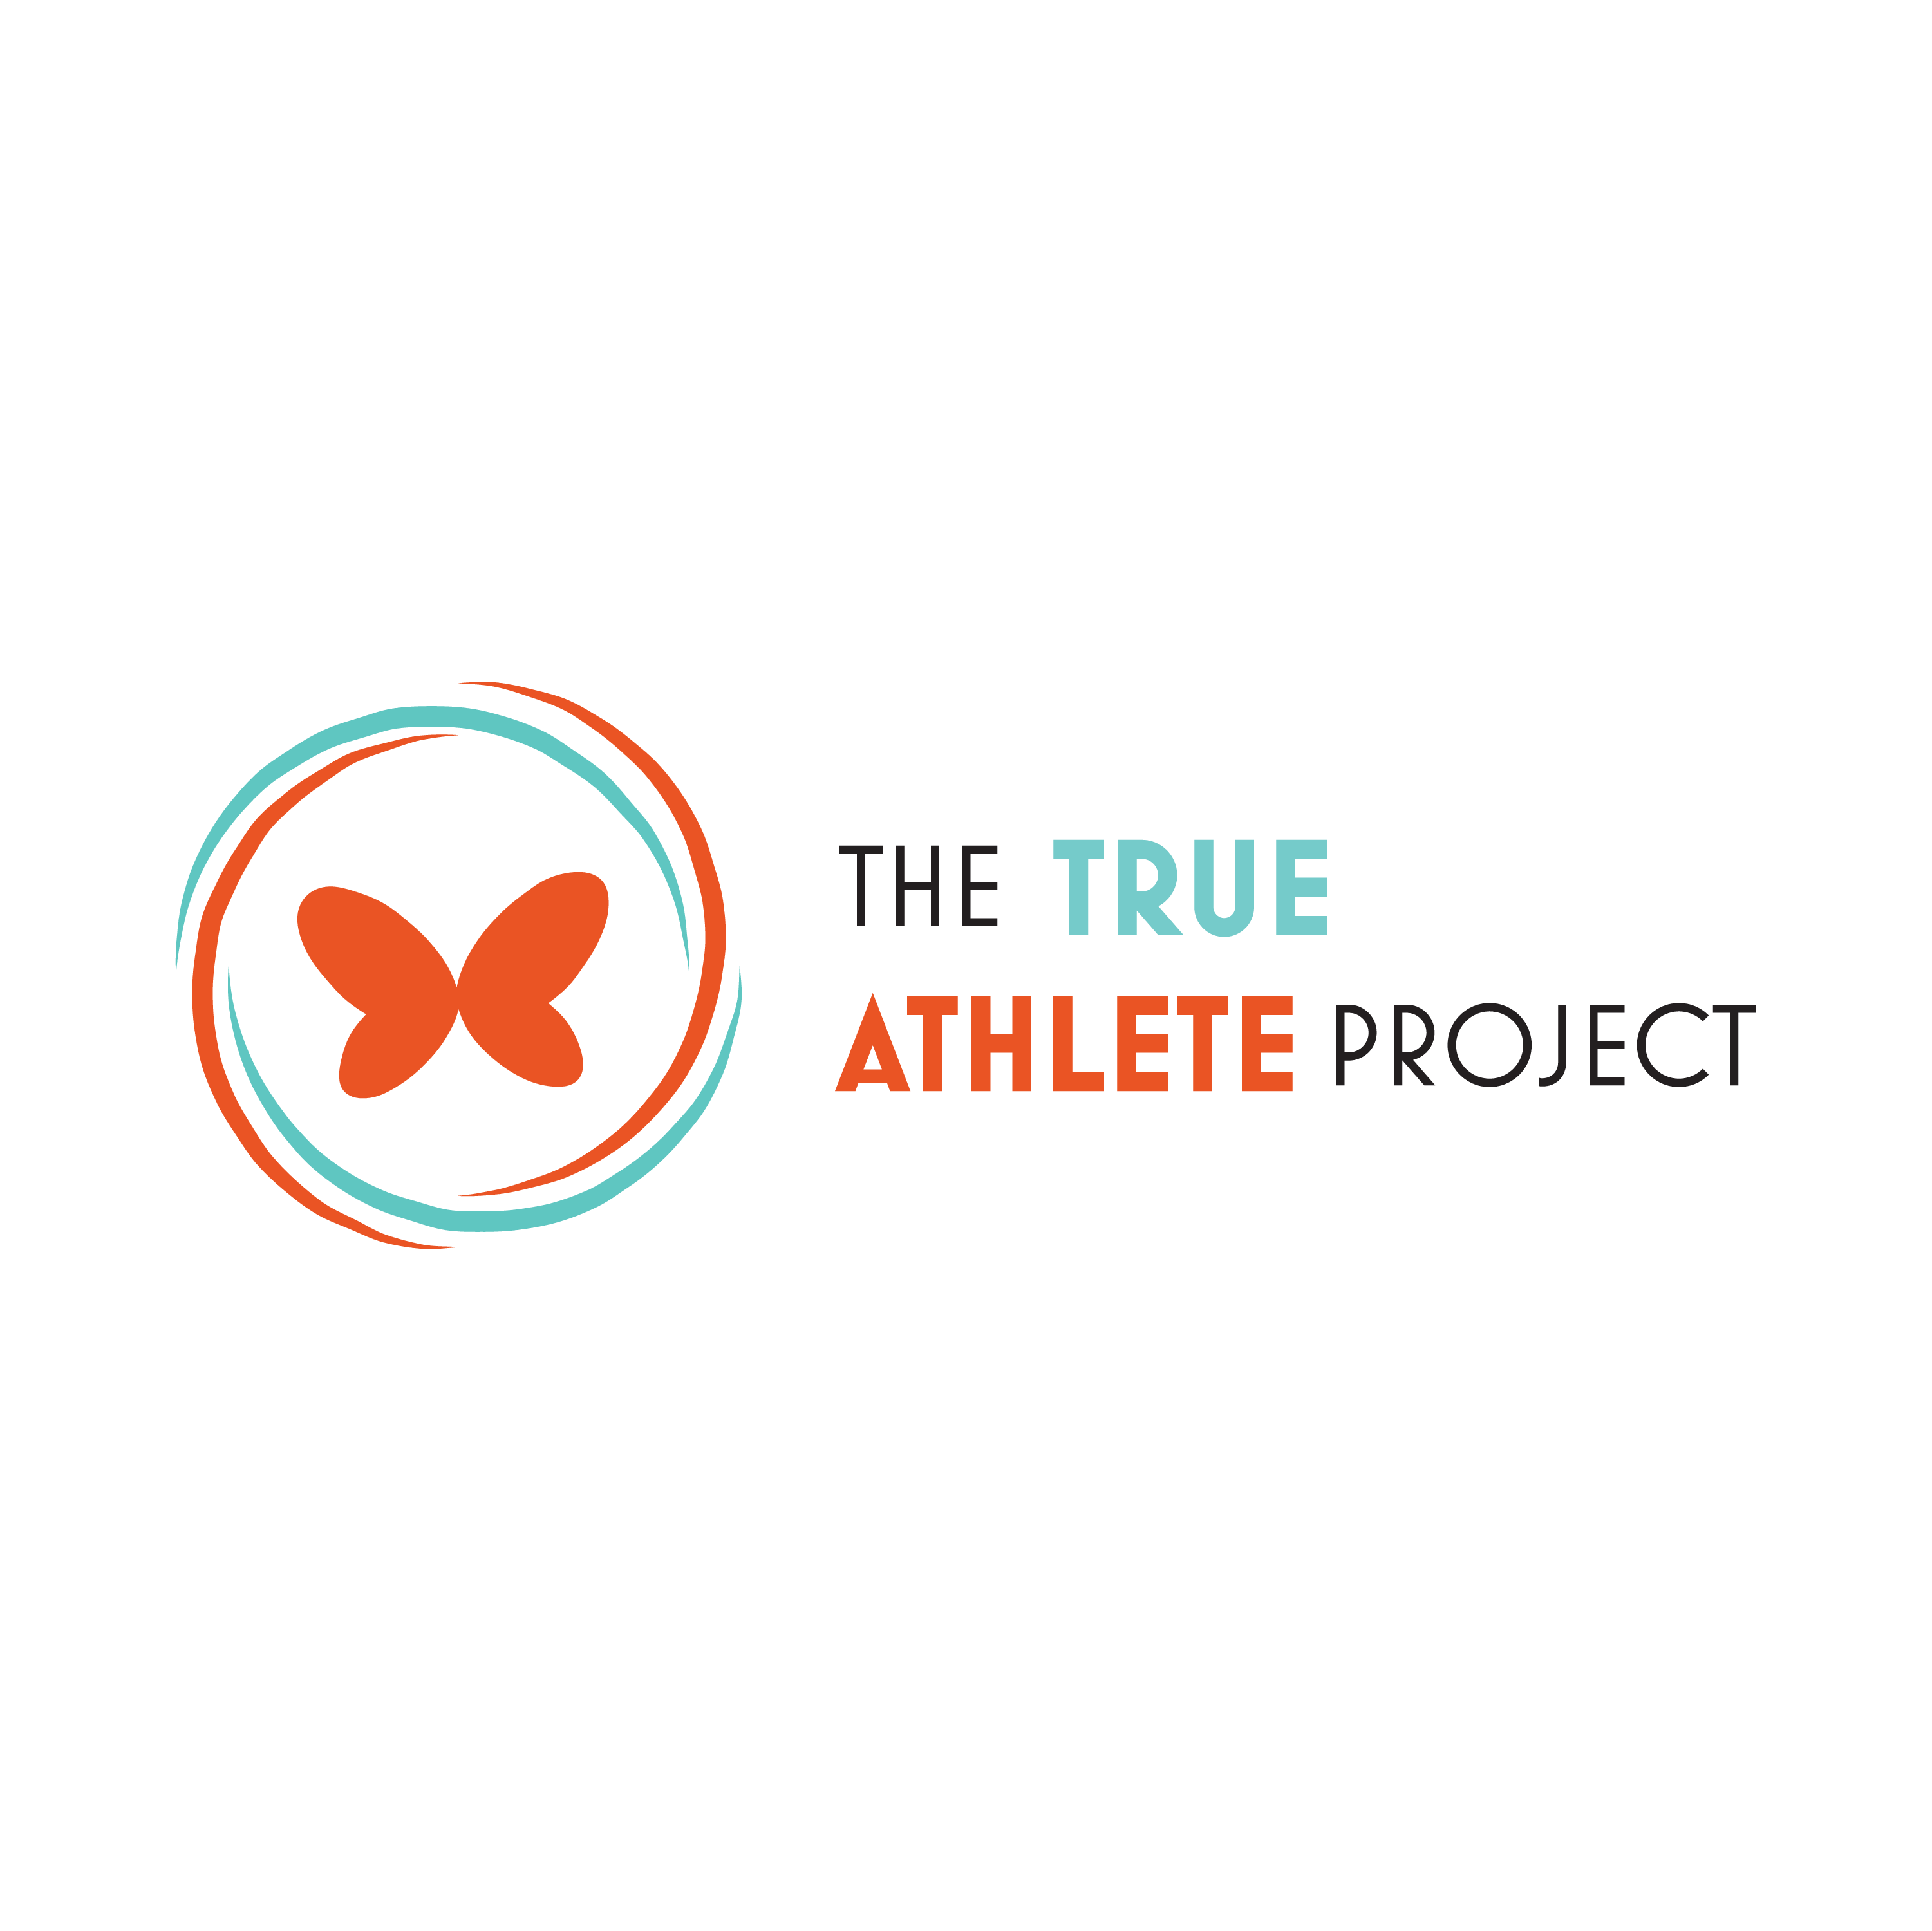 The True Athlete Project logo